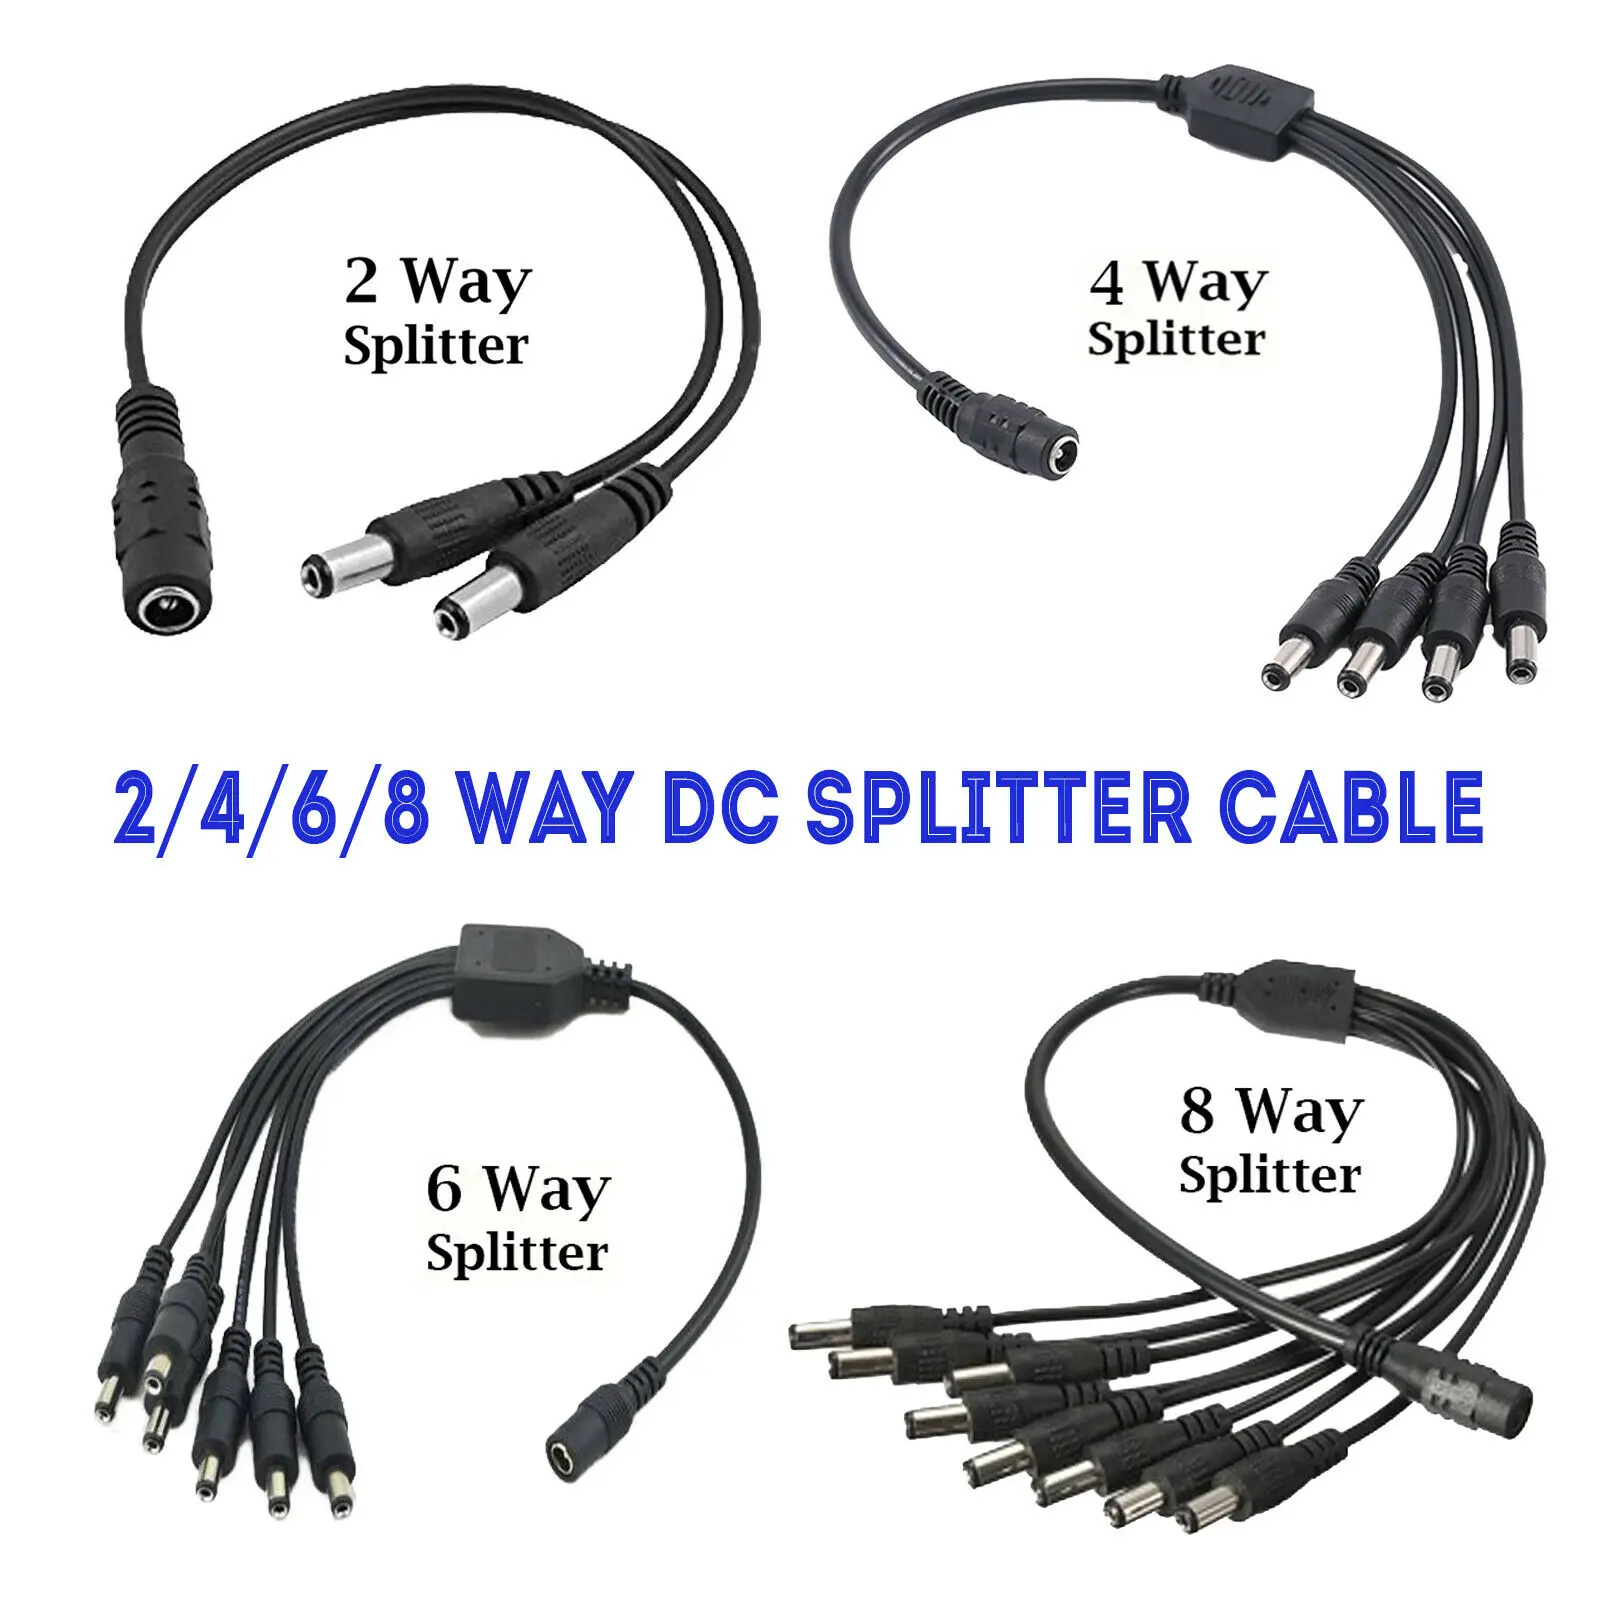 2 4 6 8 Way CCTV DC Power Splitter Adapter Cable for 12V 9V PSU Security Camera